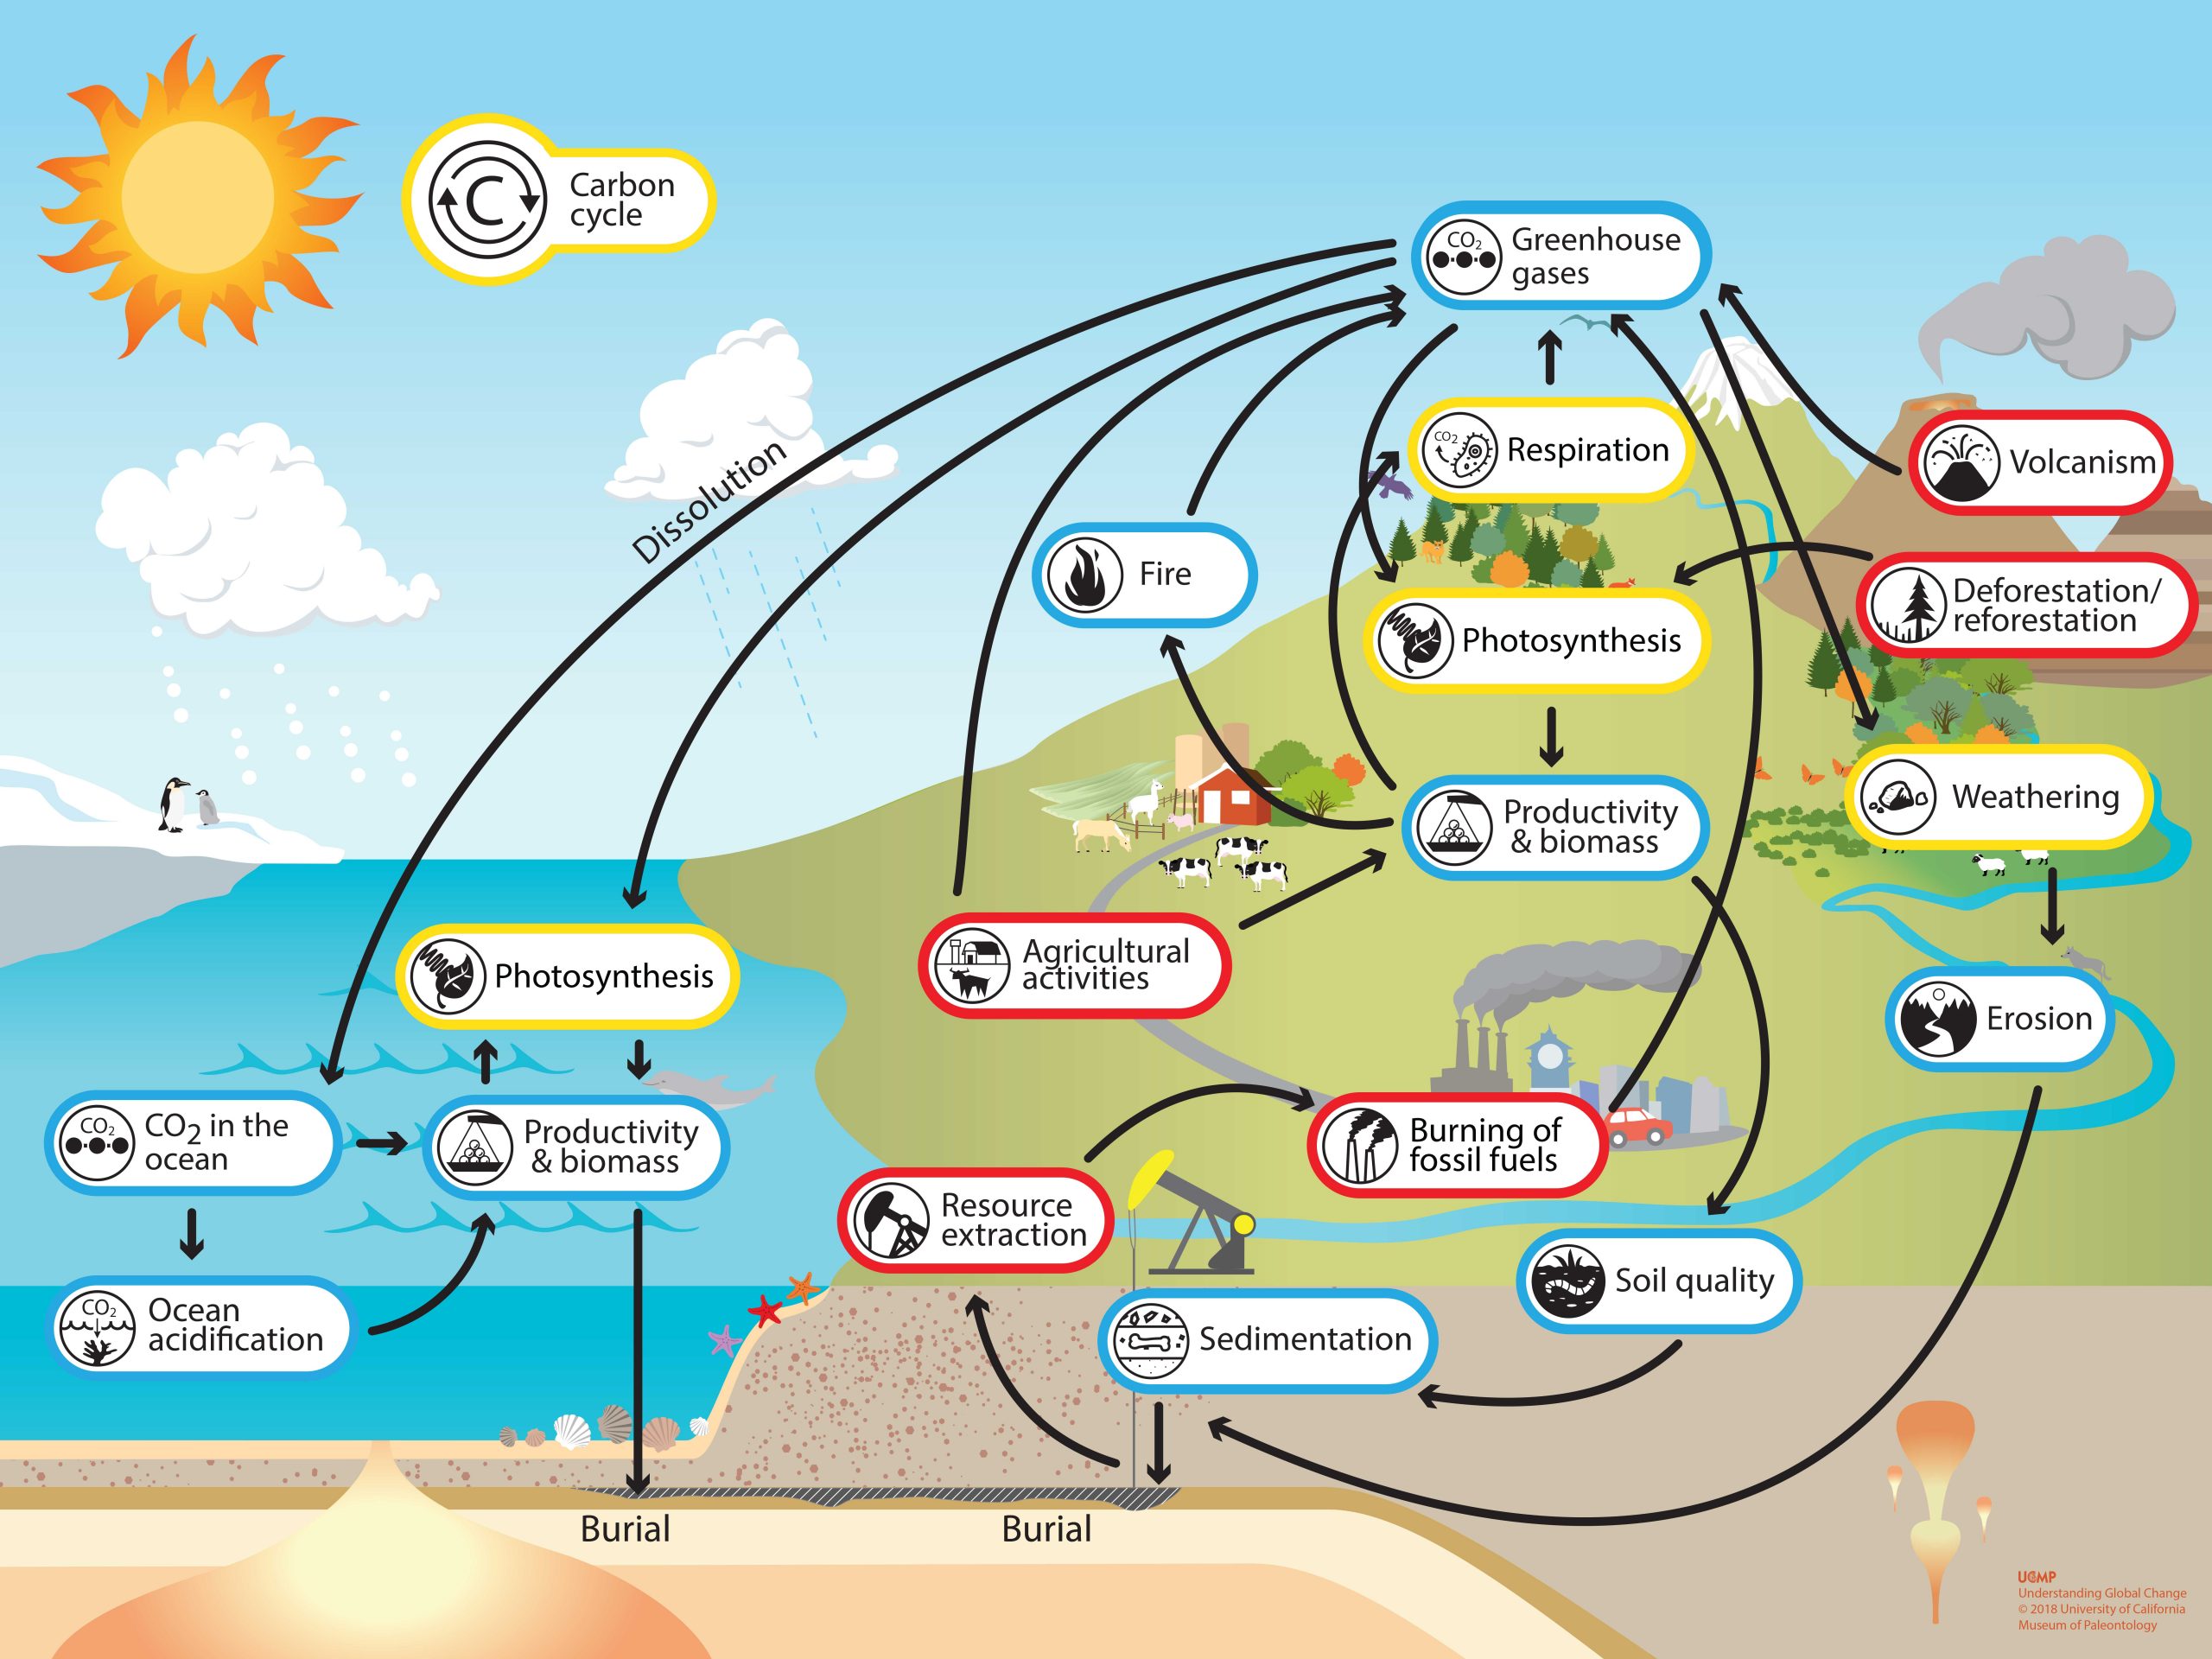 Fossil fuels carbon cycle